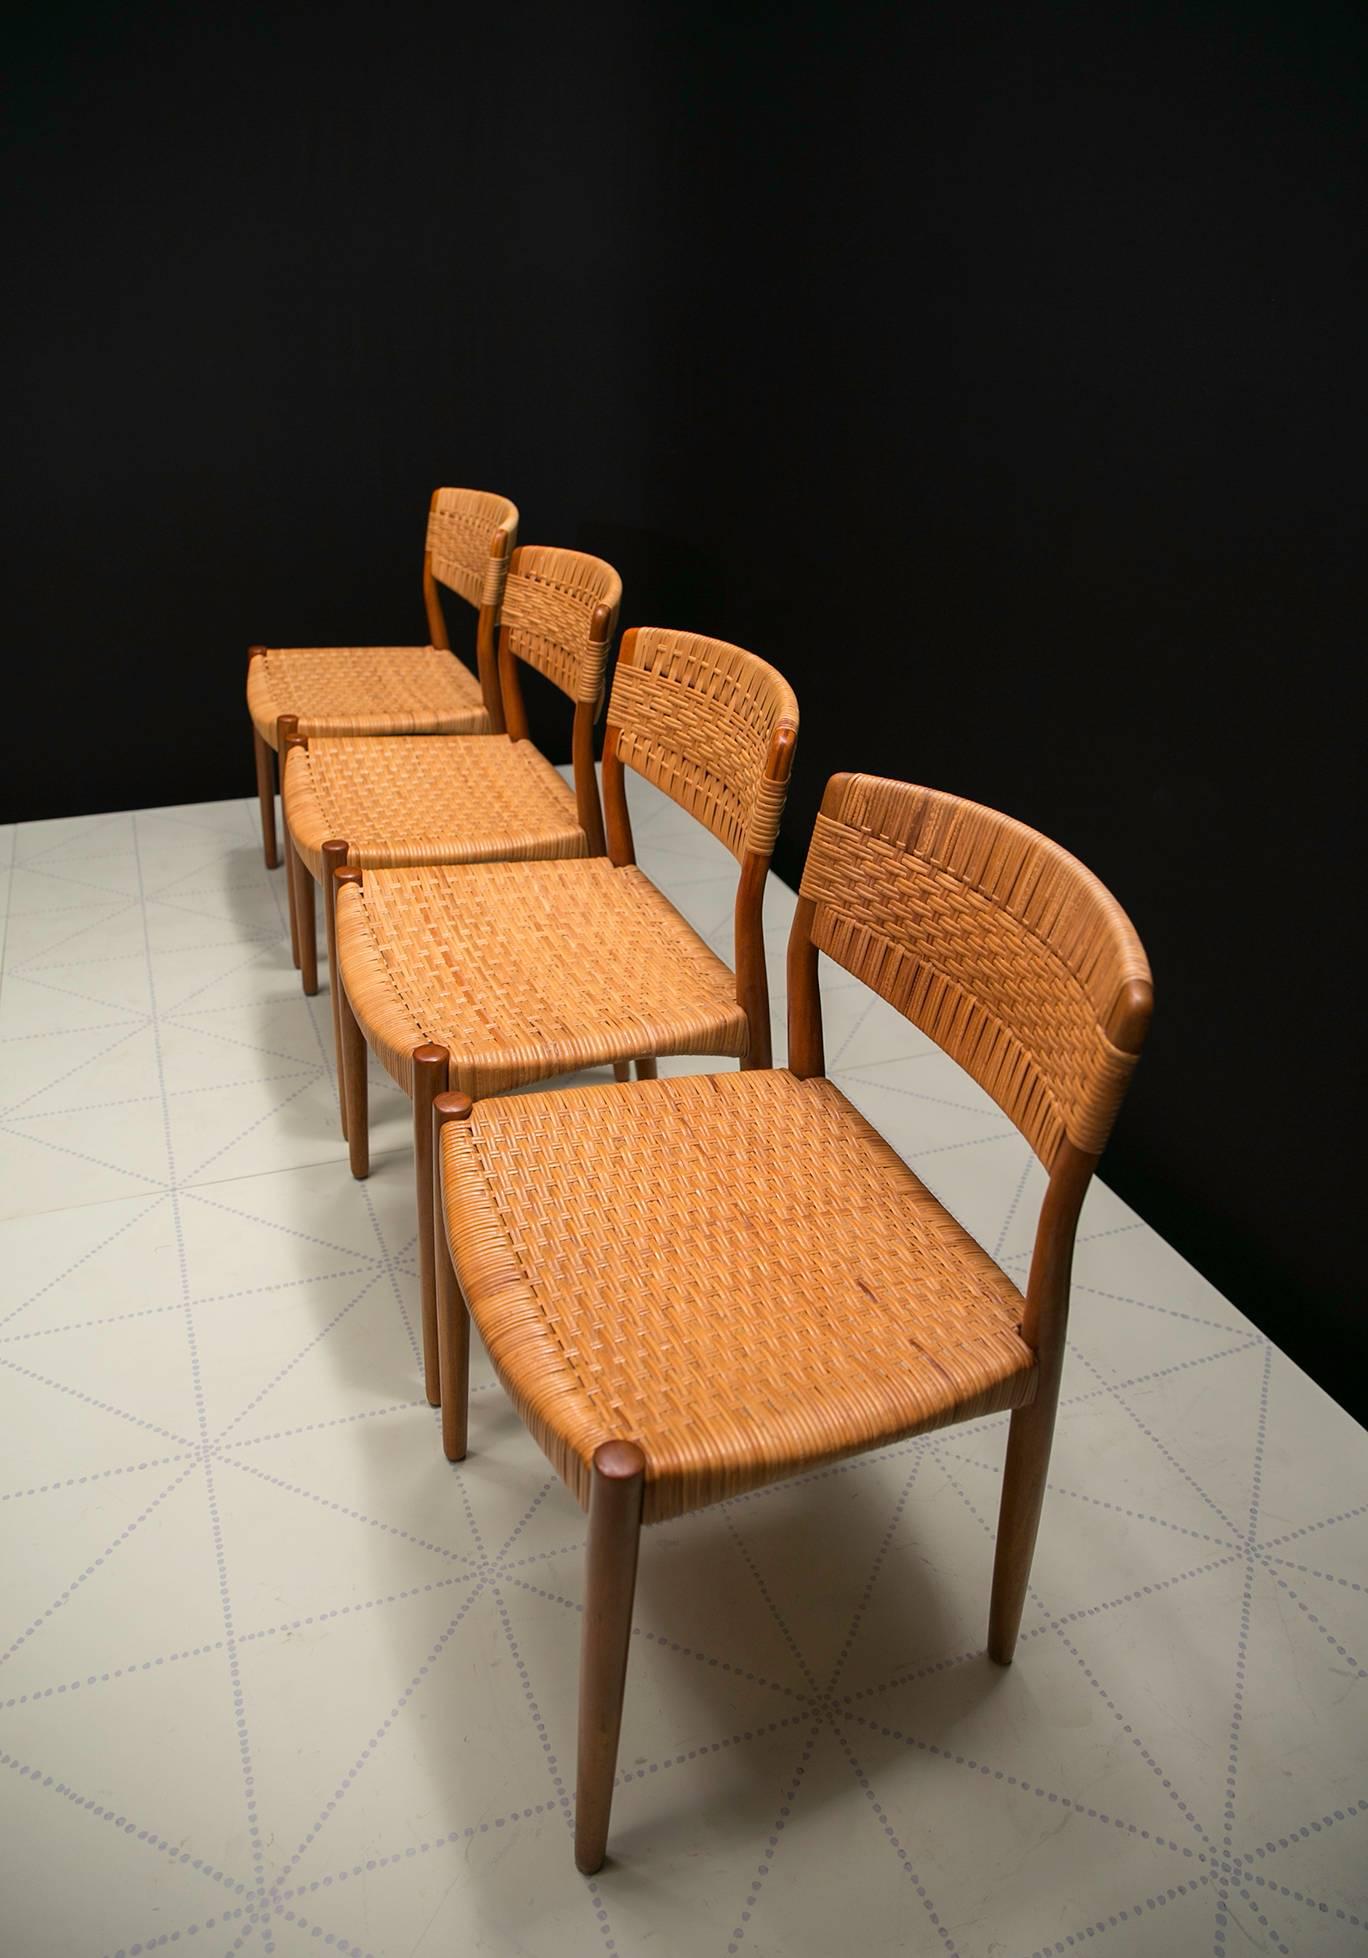 Scandinavian Modern Set of Four Dining Chairs by Ejner Larsen and Axel Bender Madsen by Willy Beck For Sale